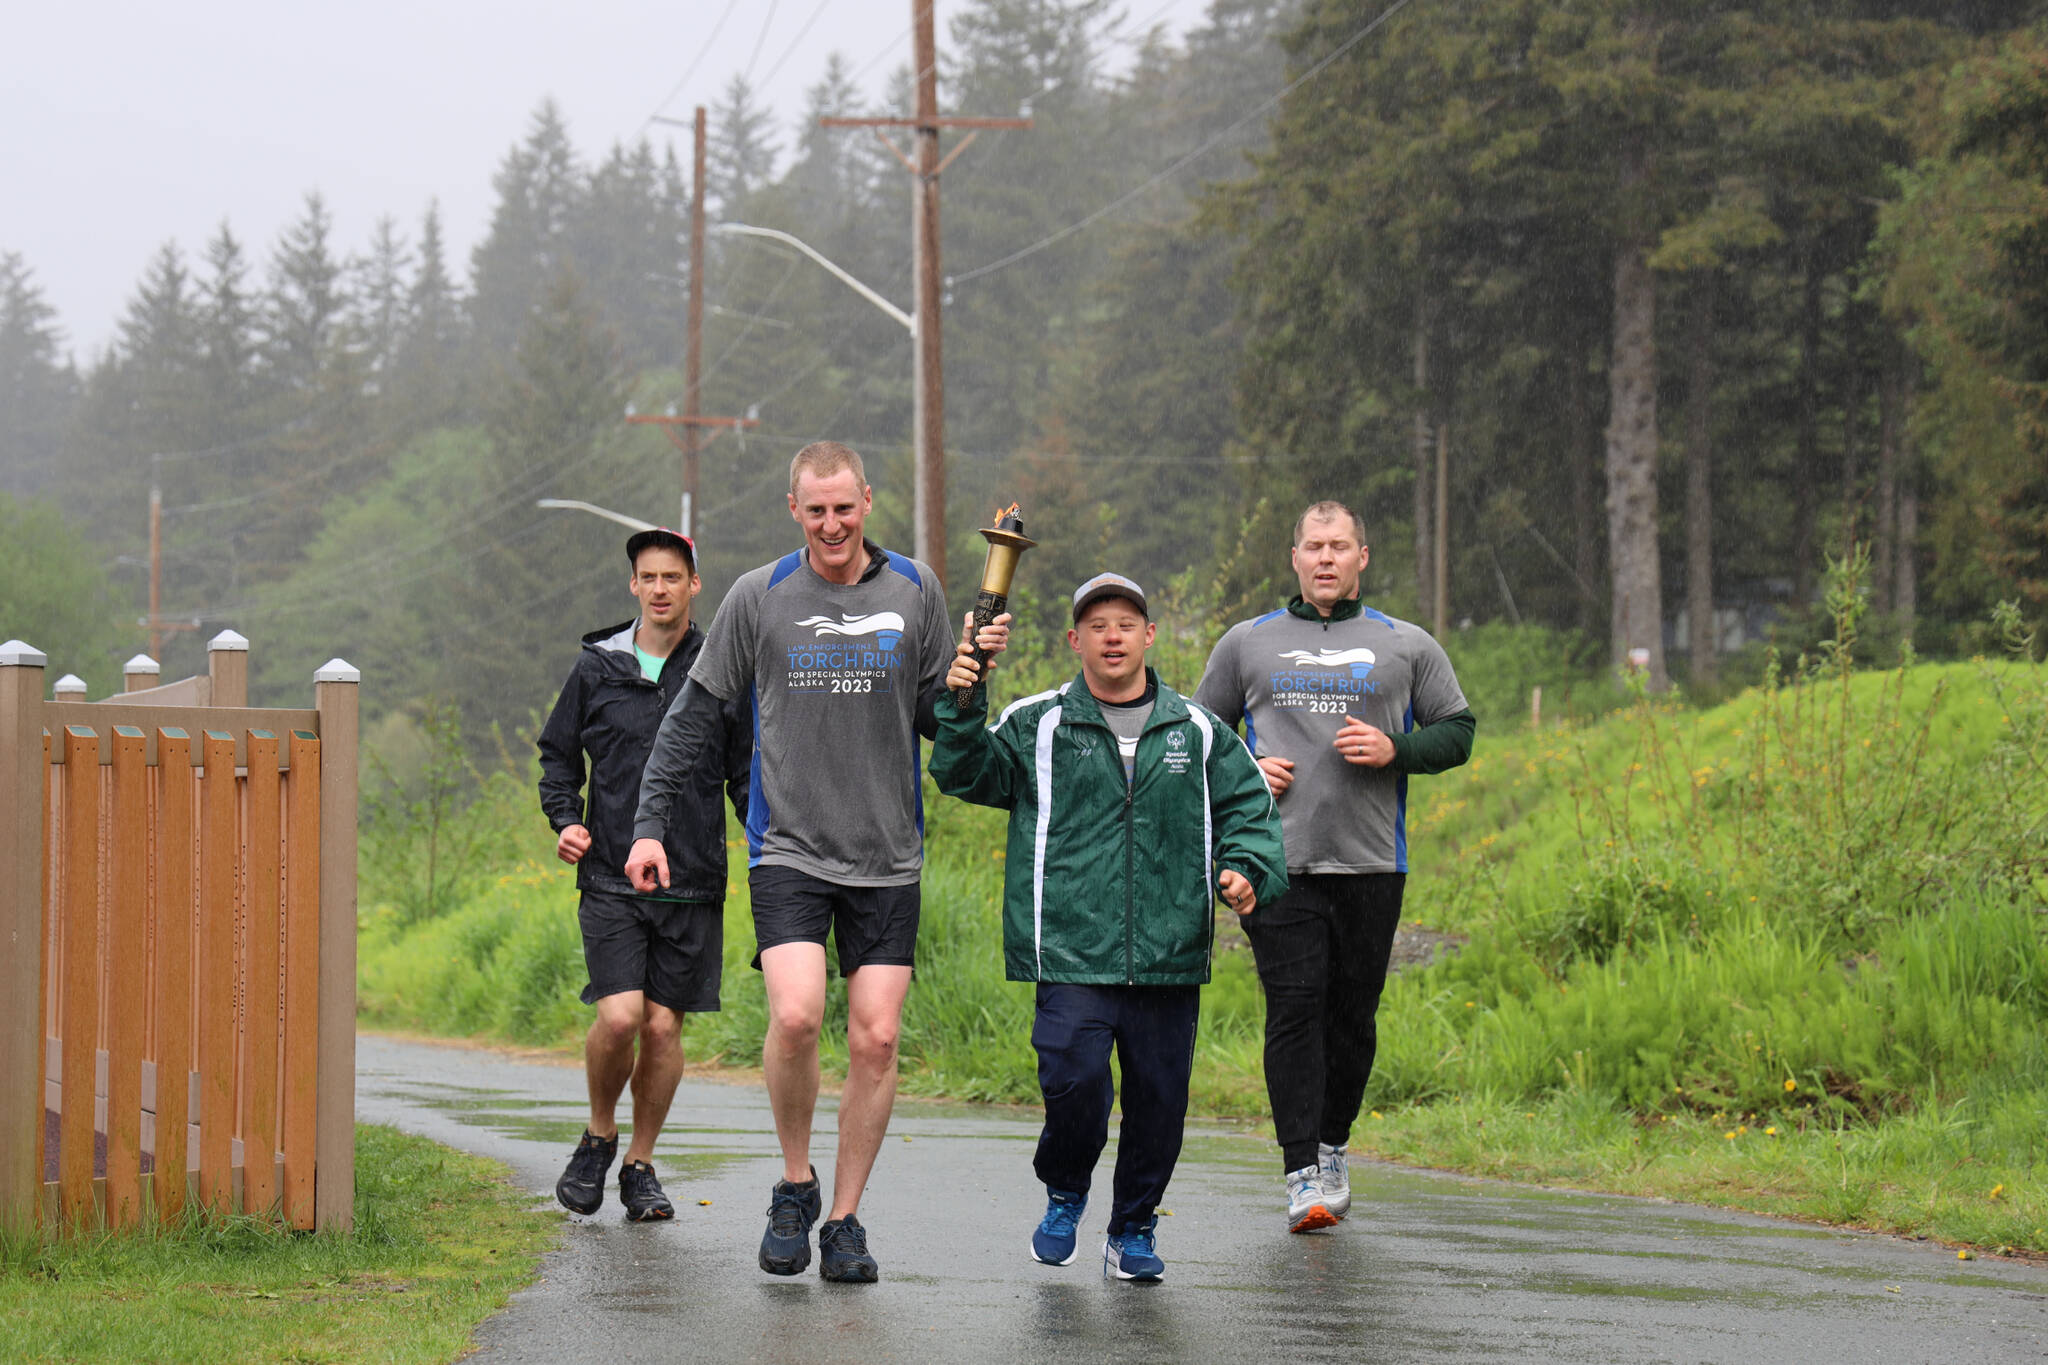 Branden Forst (left center) carries the torch with C.J. Umbs (right center) before crossing the finish line during the Alaska Law Enforcement Torch Run at Twin Lakes Park Saturday morning. (Clarise Larson / Juneau Empire)